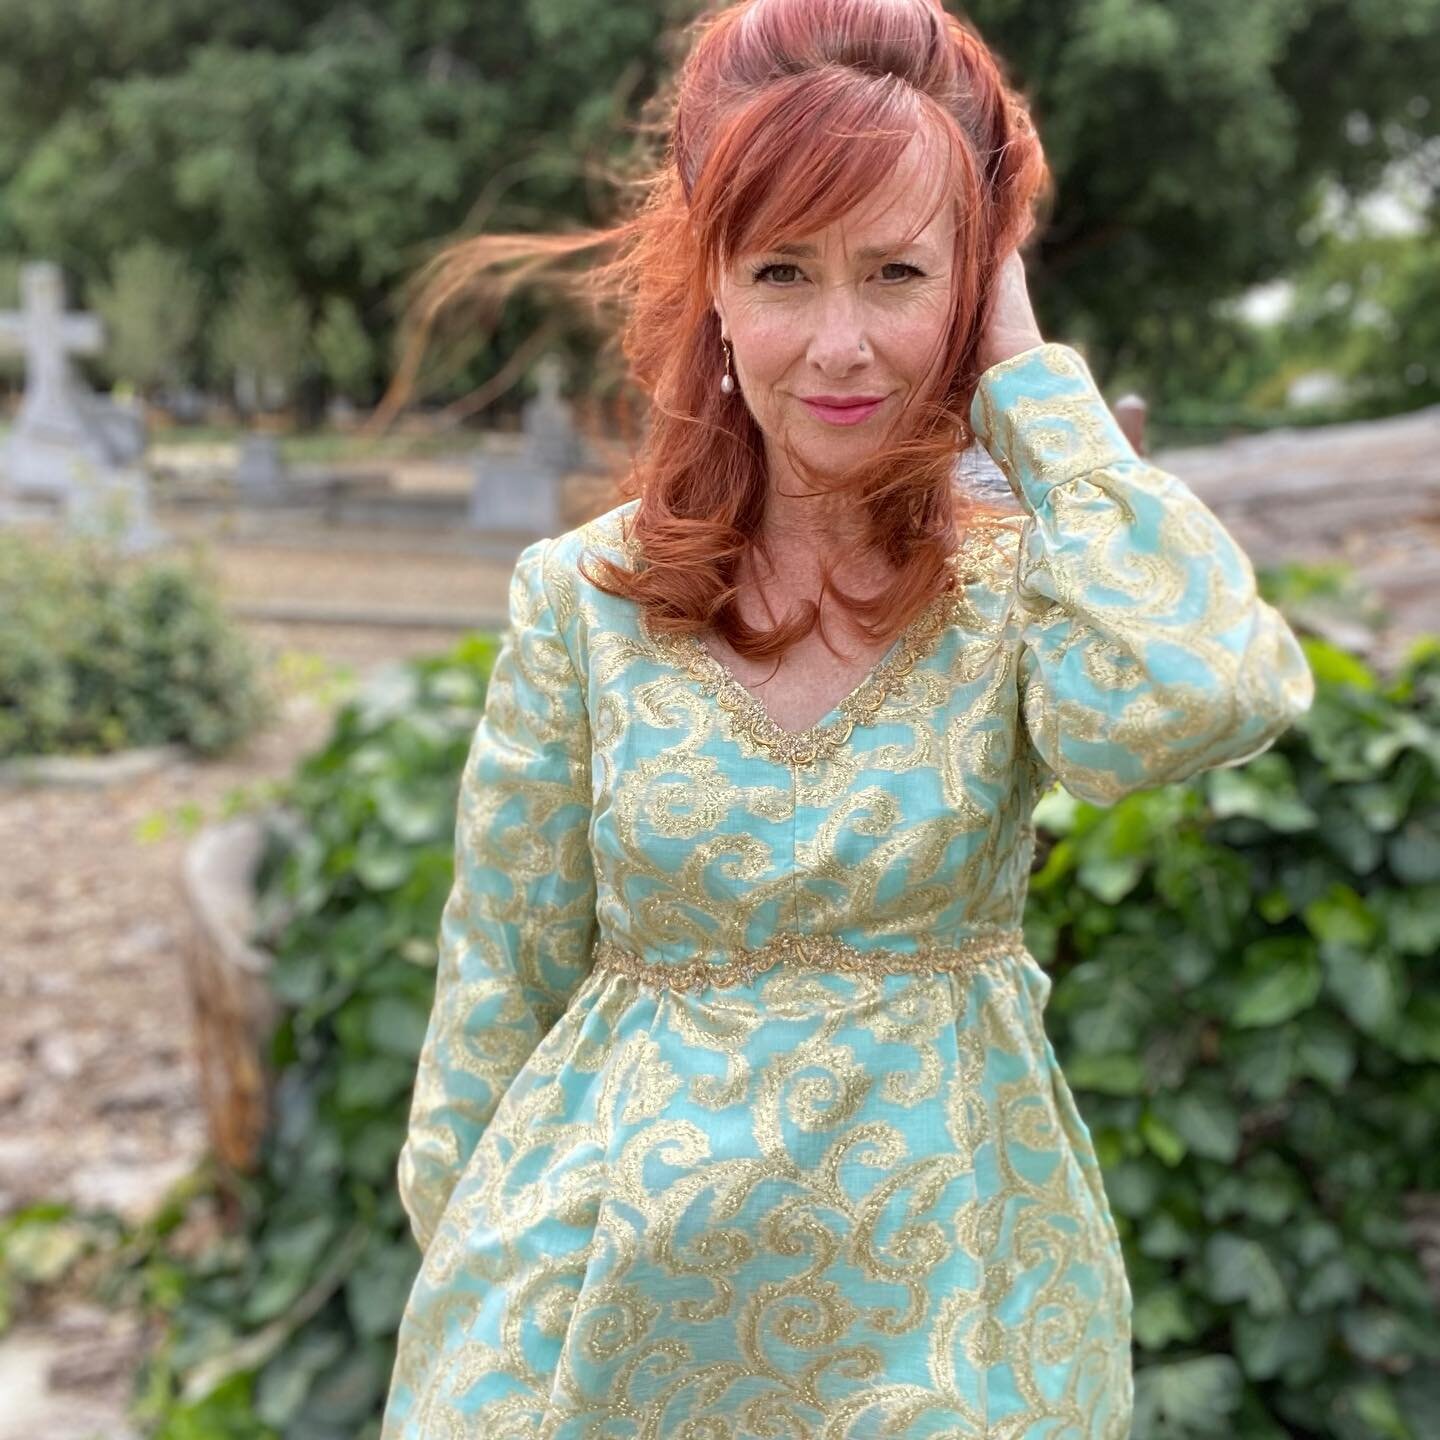 #thevintagefashionchallenge Day 28
On second thought 
I&rsquo;d rather hang out in a cemetery ☠️☠️☠️👻👻👻💀💀💀
Vintage Rappi dress from @averyvintage 

#vintage #vintagestyle #truevintageootd #vintagebingeeating #geekgirl #kitsch #retro #60s #60sfa